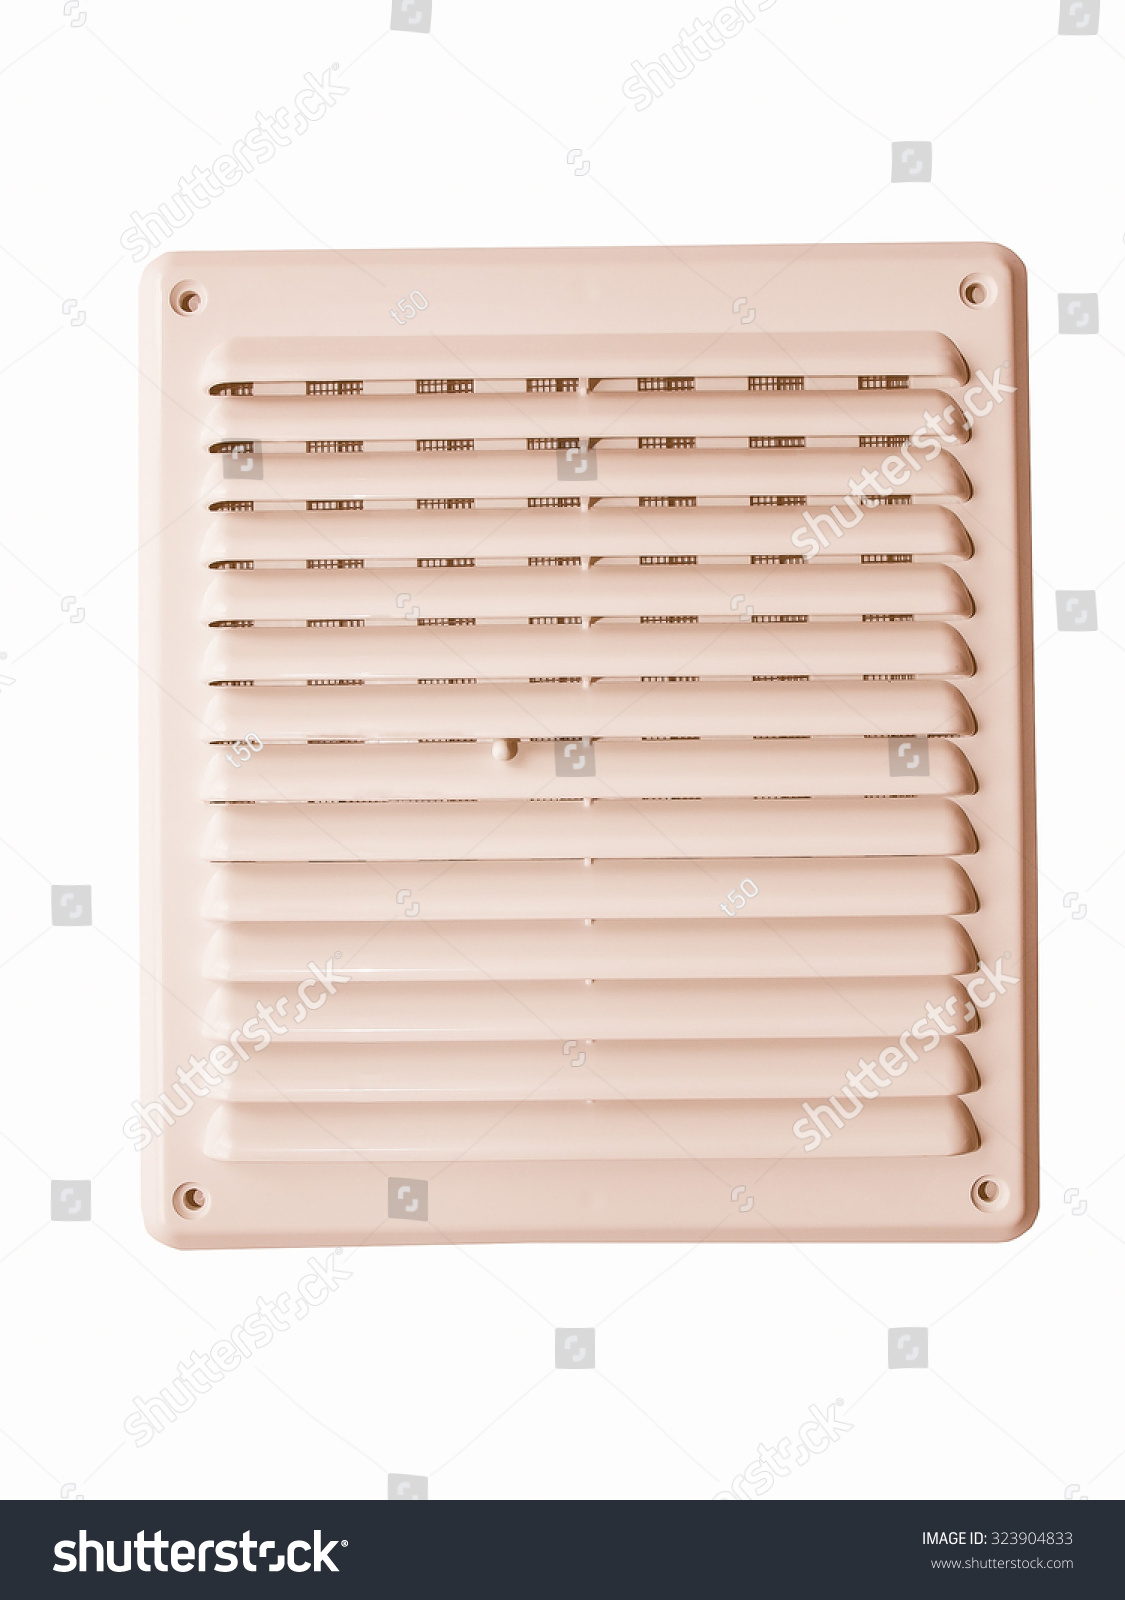 Vintage looking External wall ventilation grill for home safety #323904833